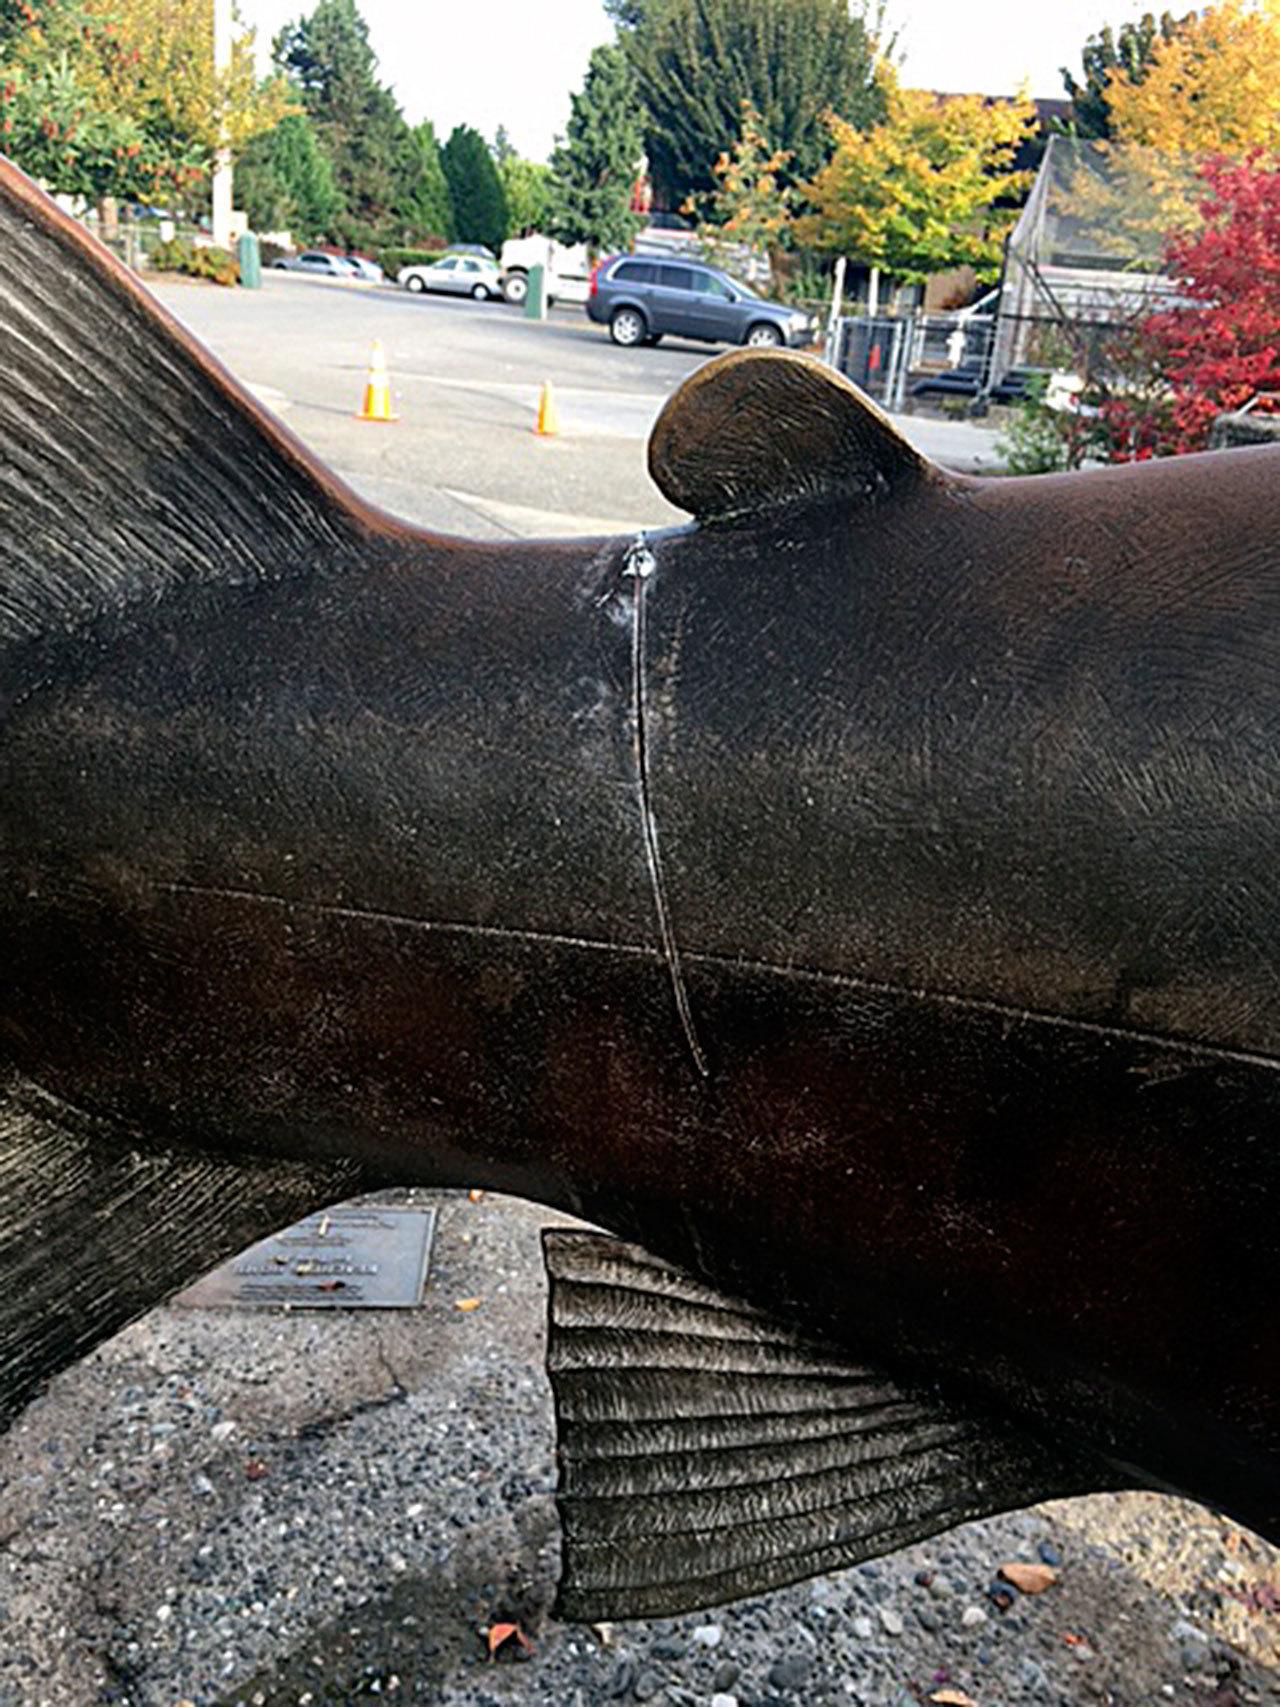 Beloved statue “Finley the salmon” vandalized with a saw